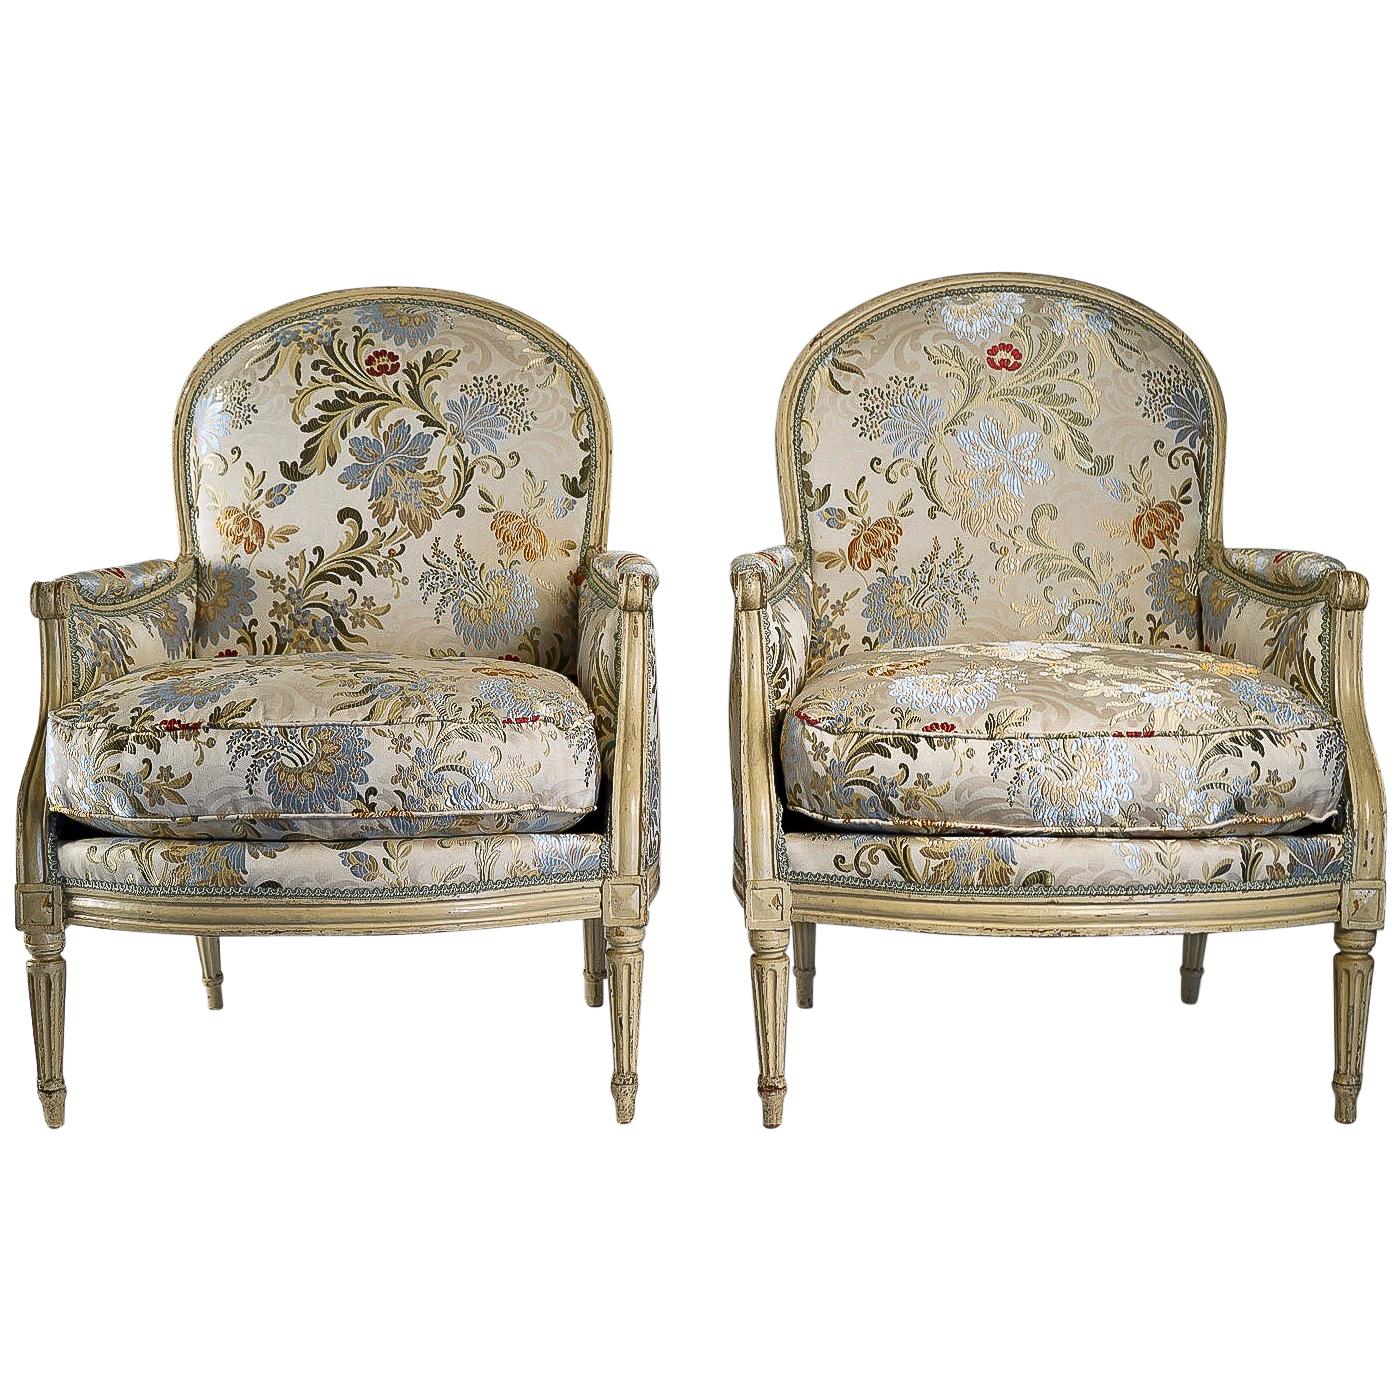 French Louis XVI Period, Lacquered Beech-Wood Pair of Large Bergeres, circa 1780